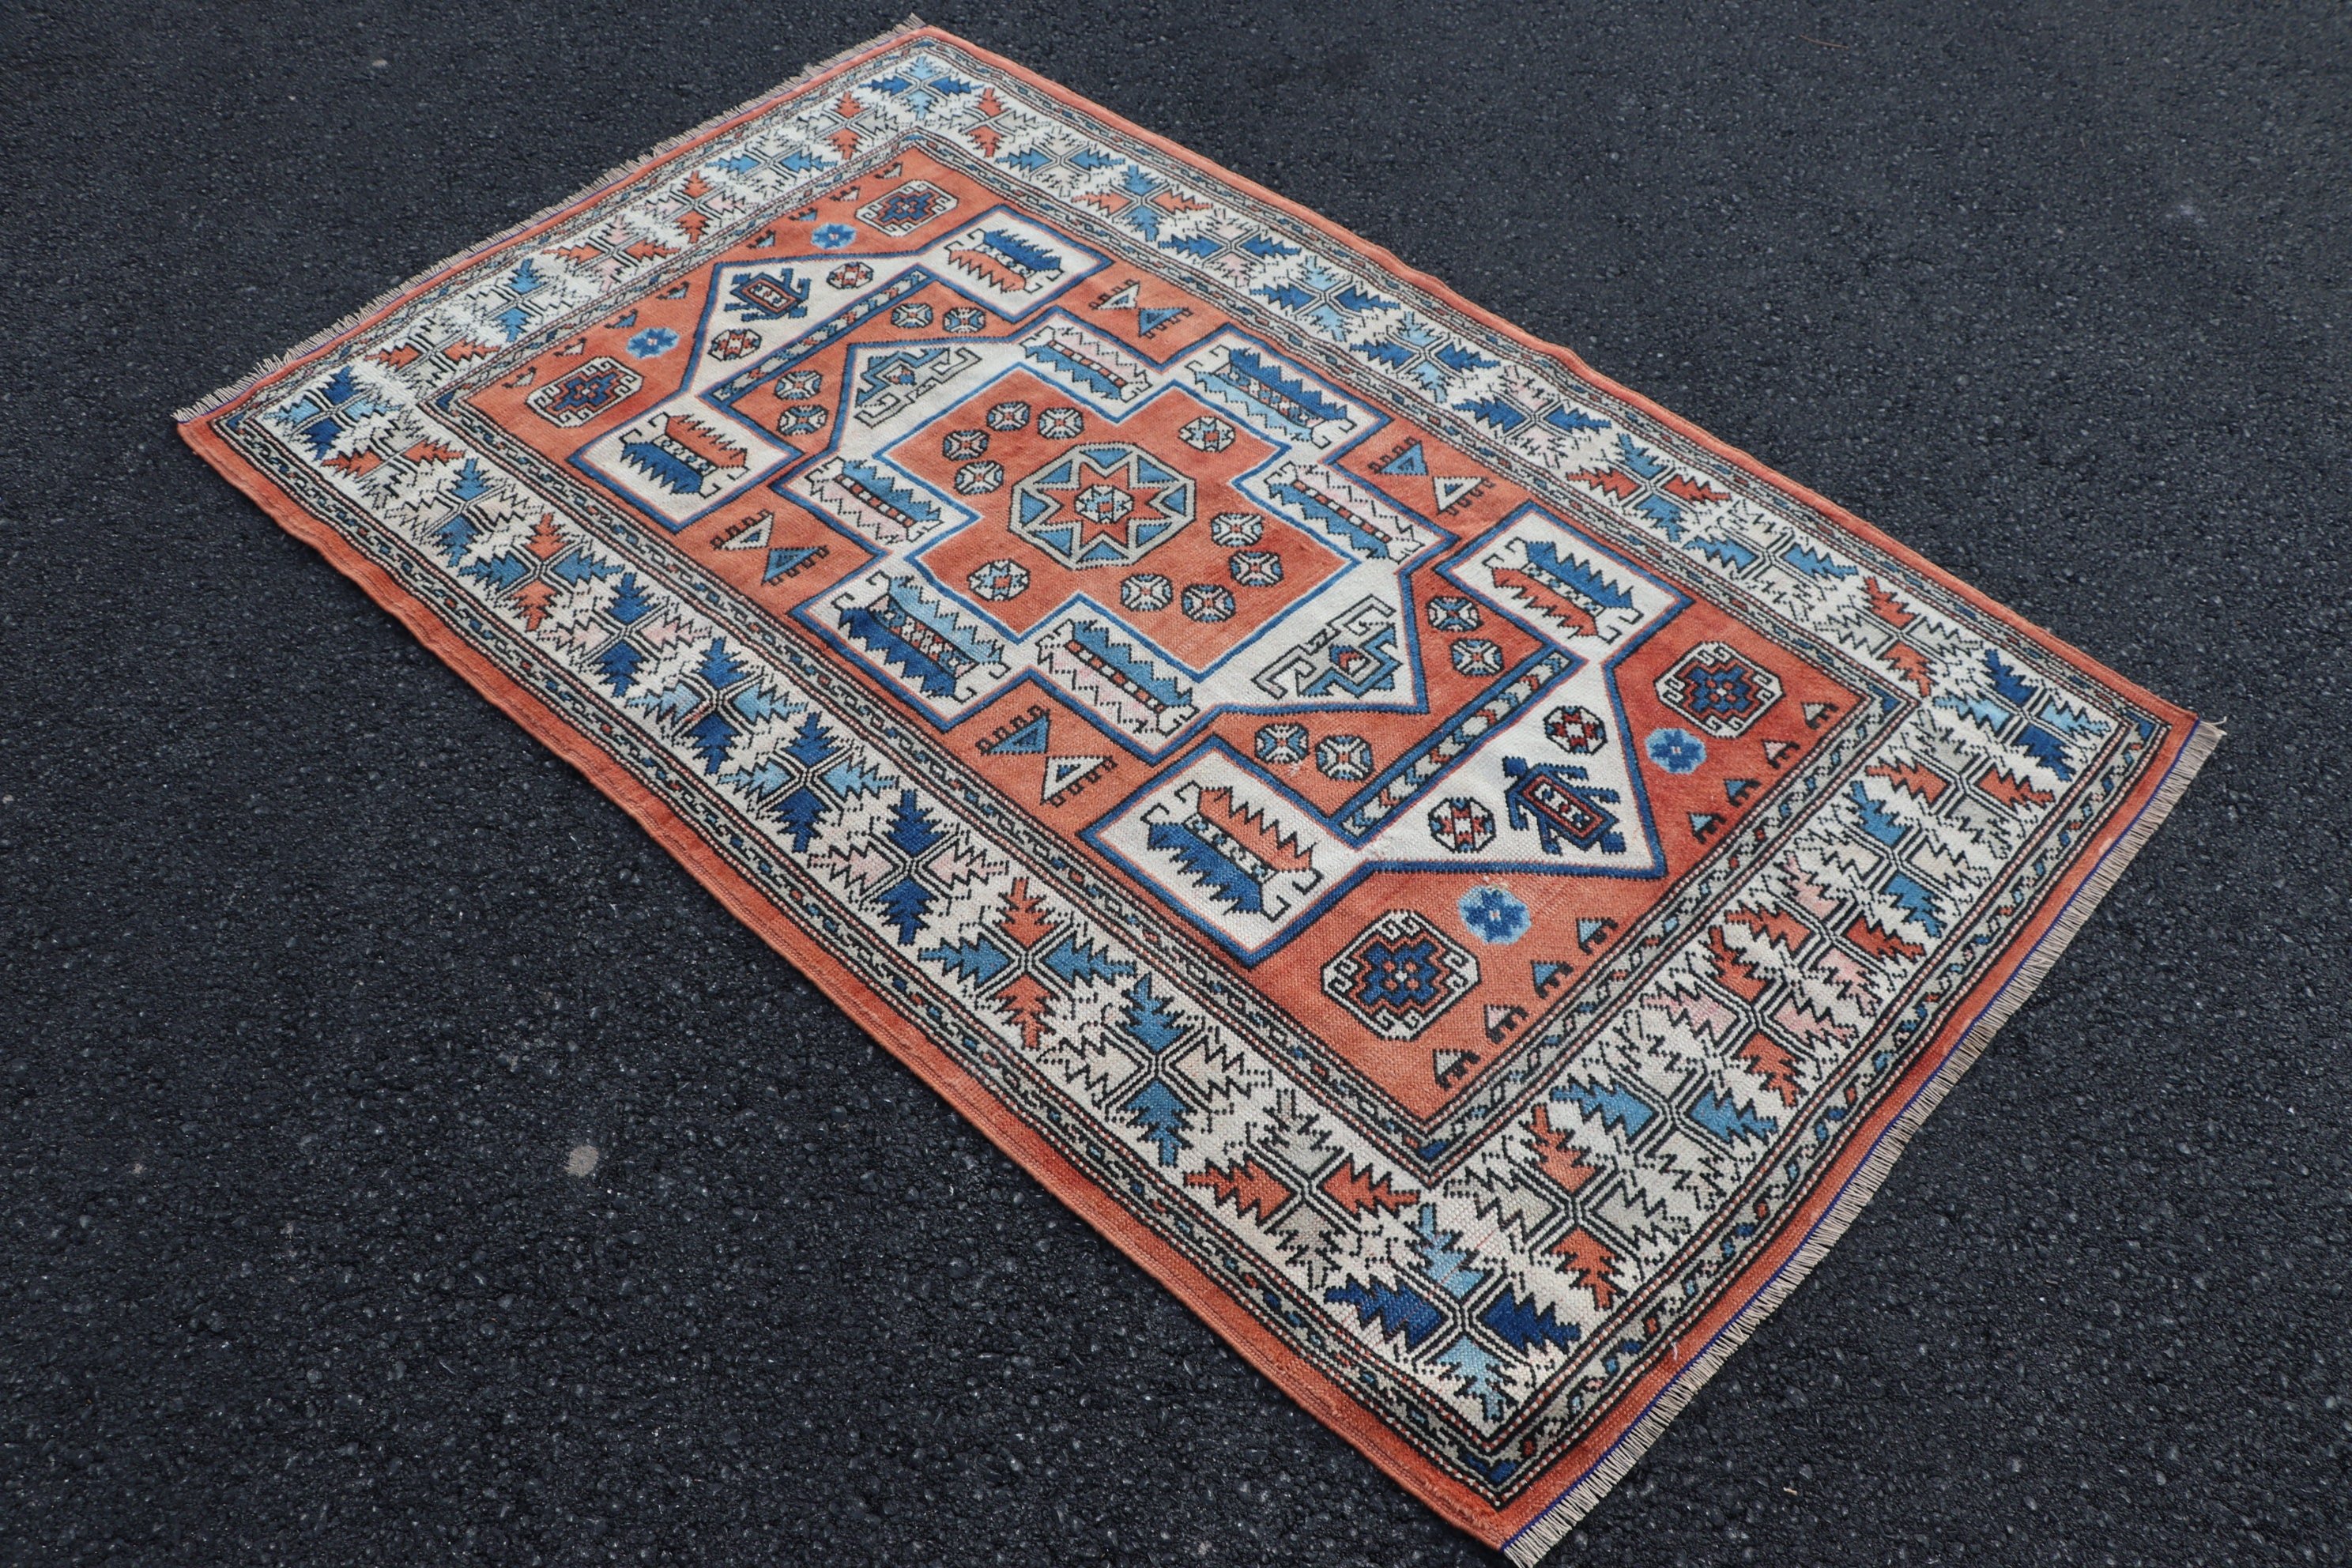 Vintage Rug, Rugs for Entry, 3.8x6.3 ft Accent Rugs, Nursery Rug, Moroccan Rug, Red Kitchen Rugs, Bedroom Rug, Turkish Rug